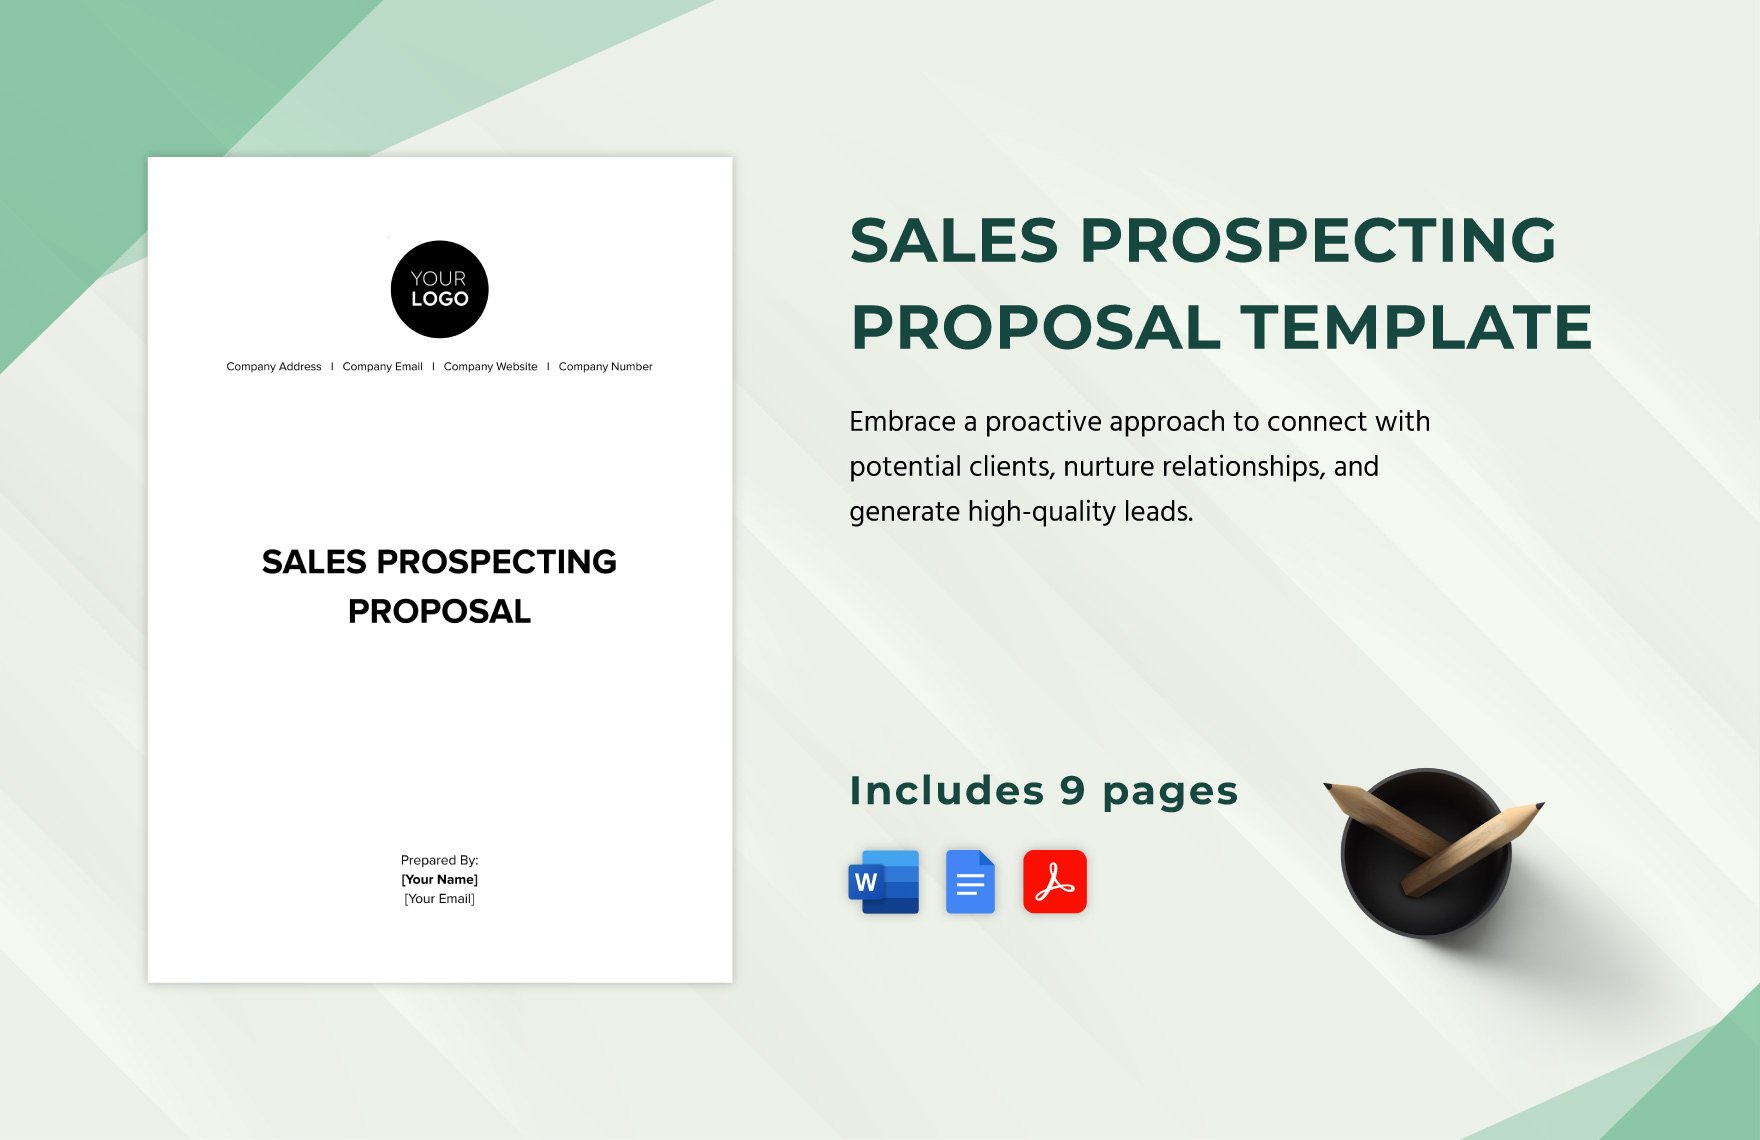 Sales Prospecting Proposal Template in Word, Google Docs, PDF